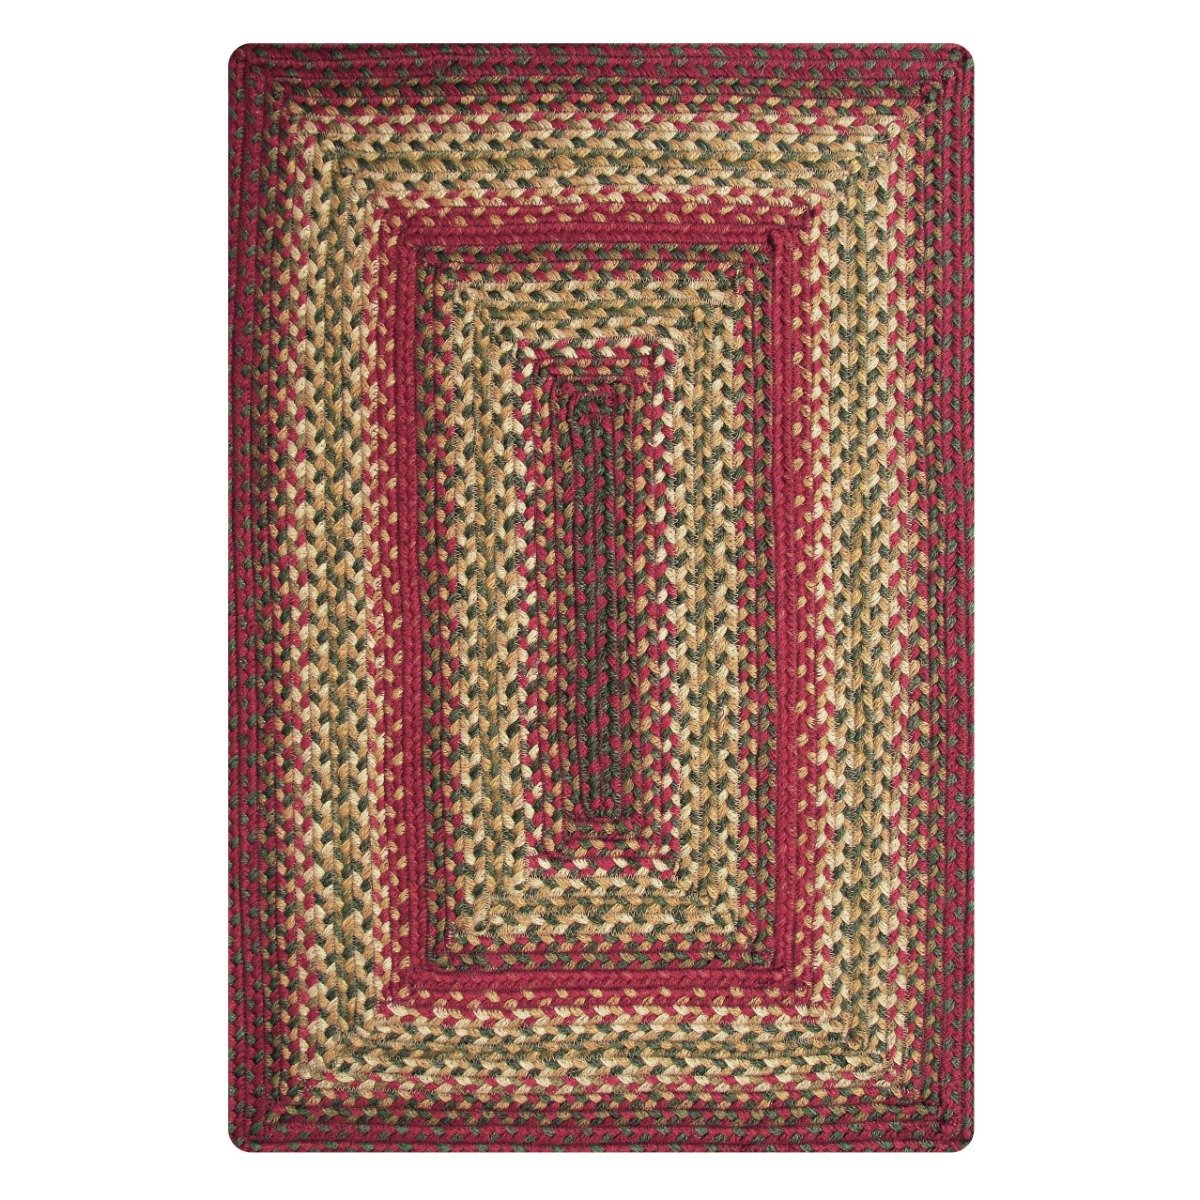 Jute Braided Rugs Online in All Shapes, Colors & Designs